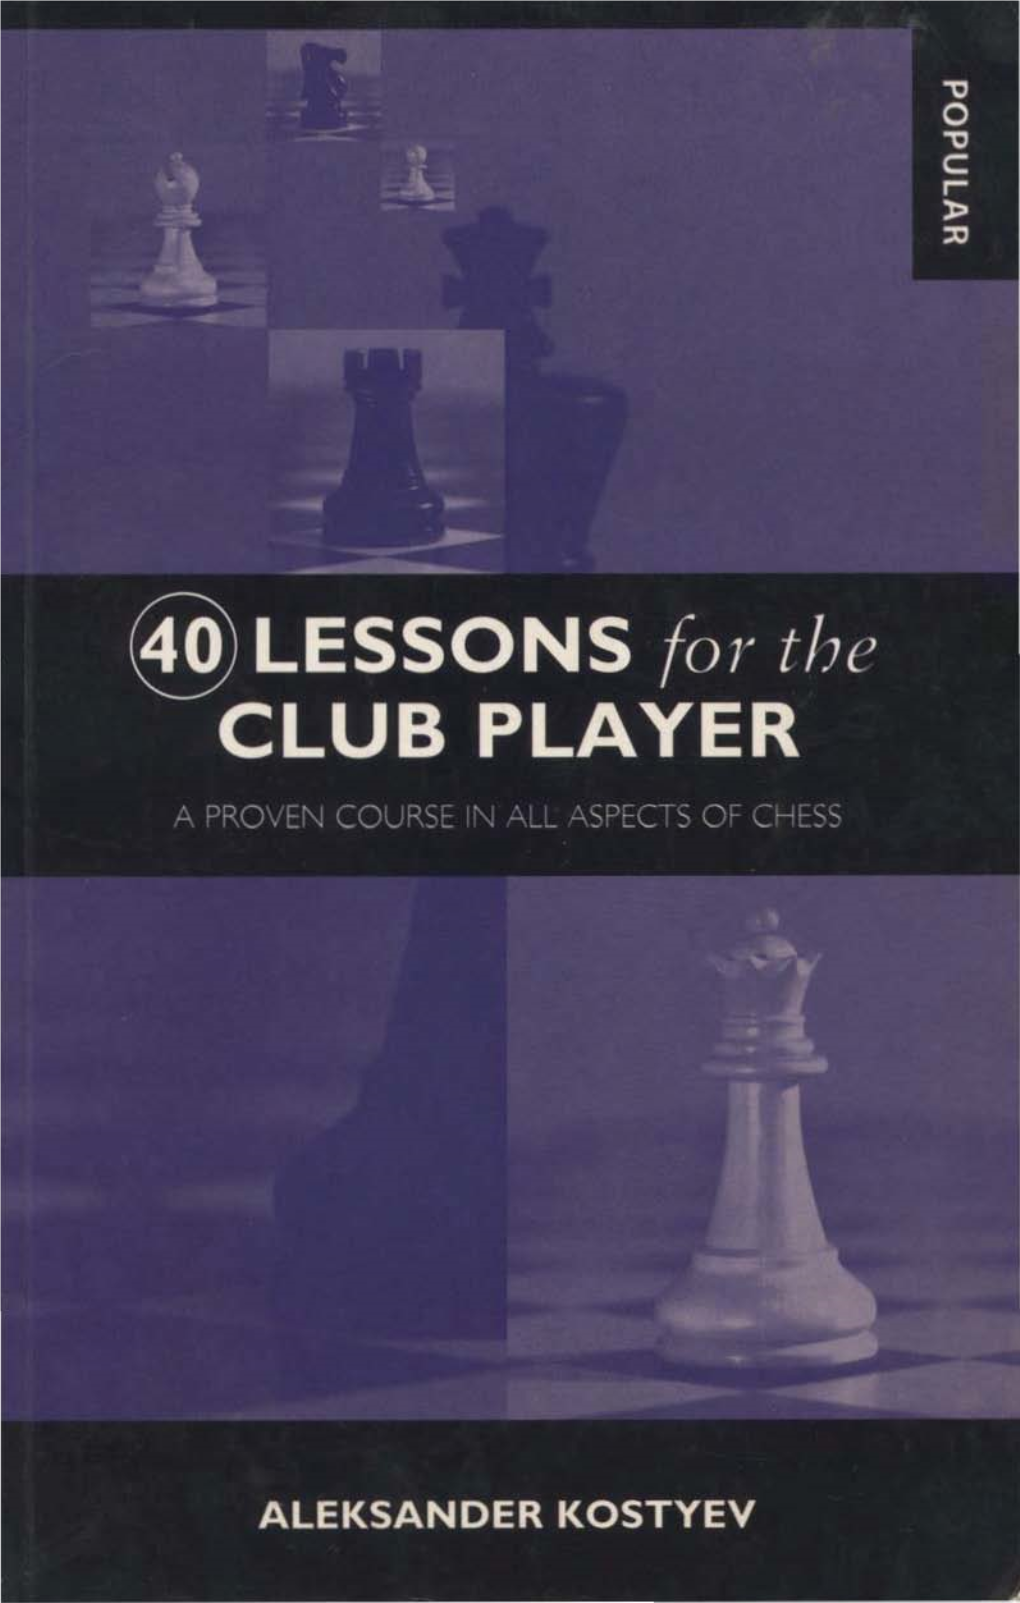 40 Lessons for the Club Player